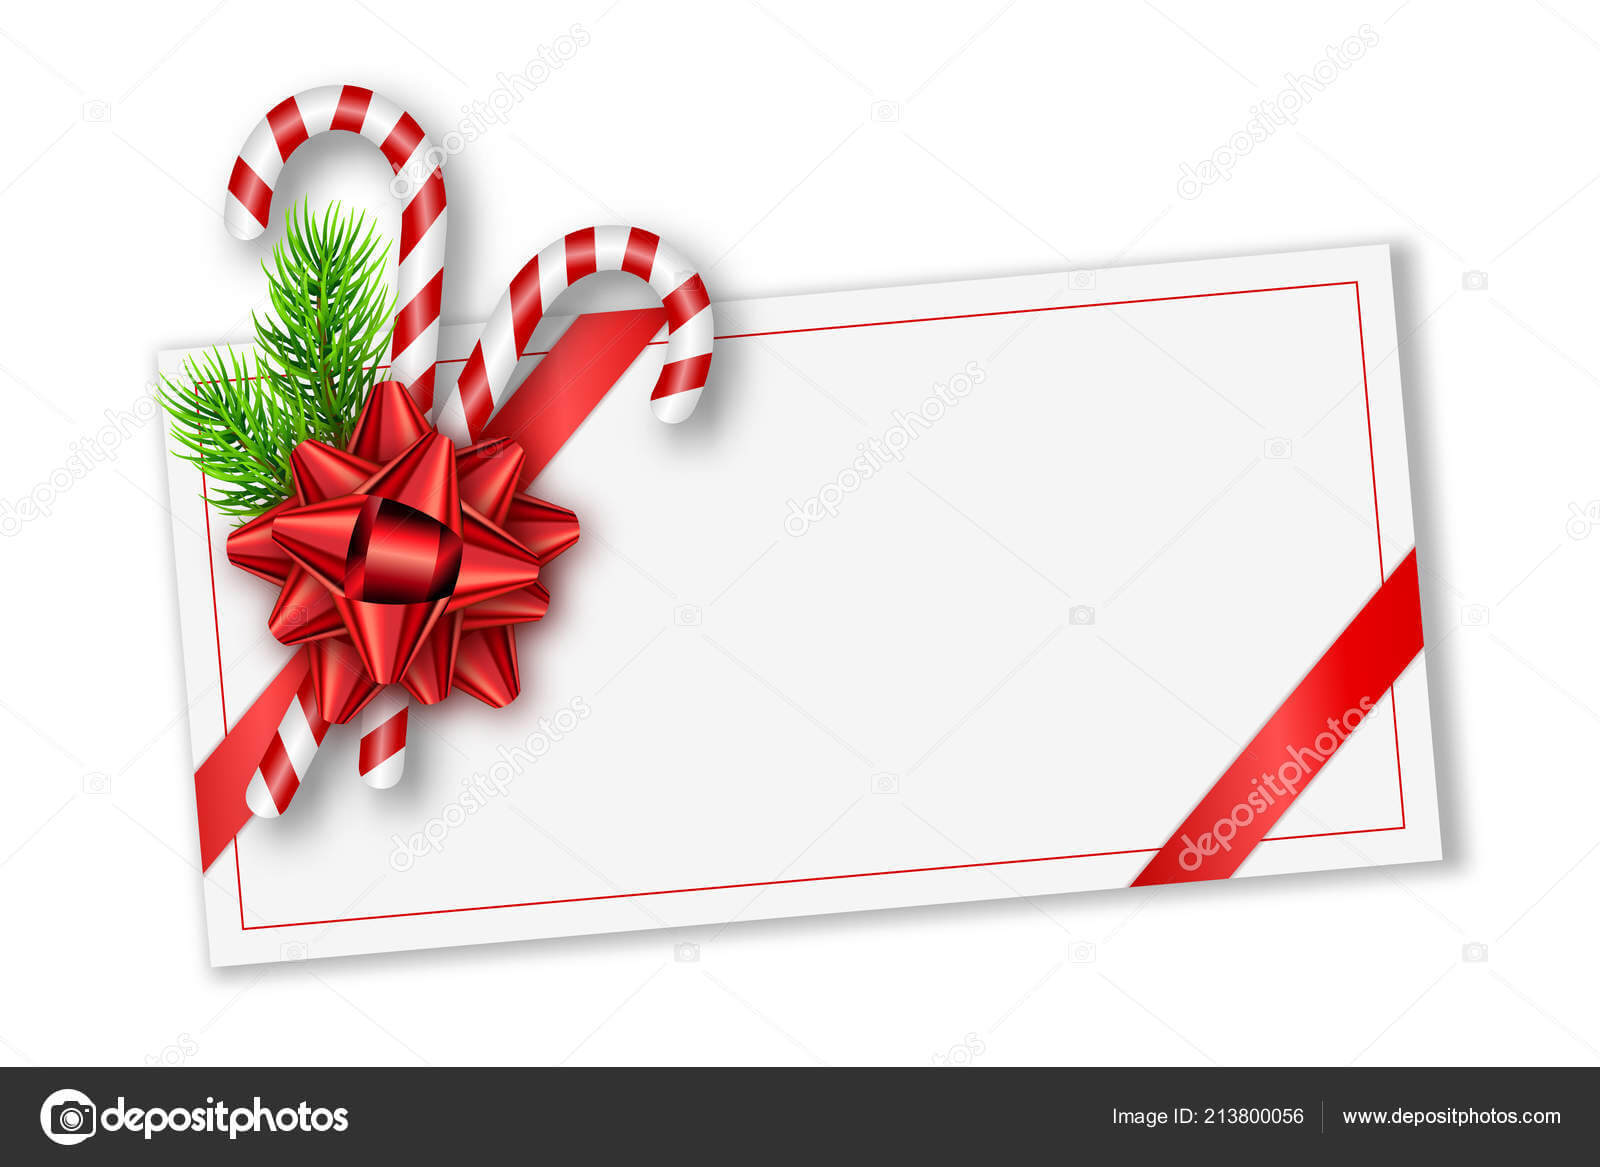 holiday-christmas-gift-card-with-red-bow-fir-tree-branches-inside-present-card-template